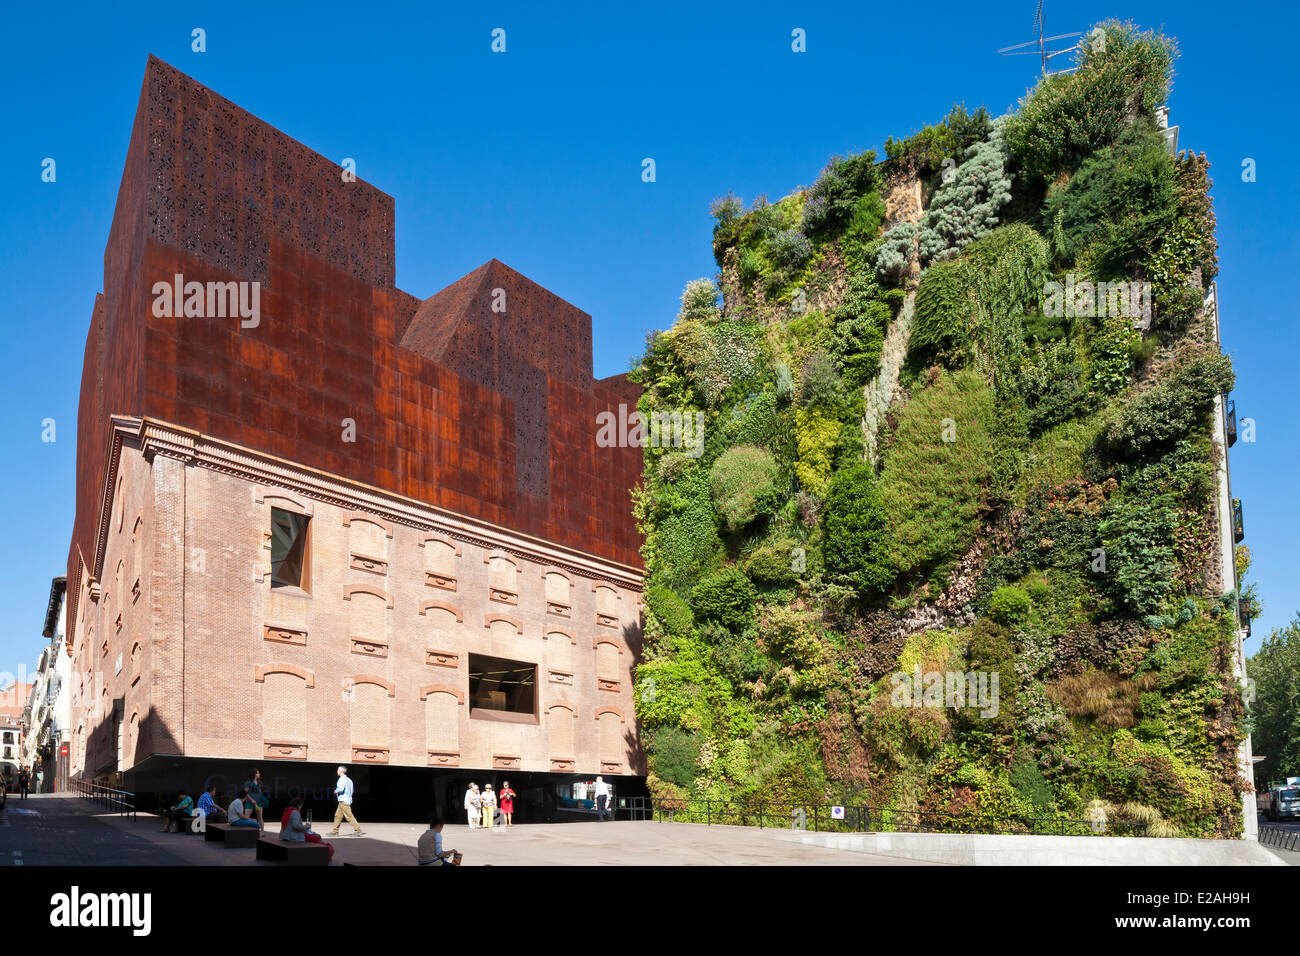 Spain, Madrid, CaixaForum, cultural center sponsored by La Caixa bank and located in a former factory renovated by Herzog & de Stock Photo